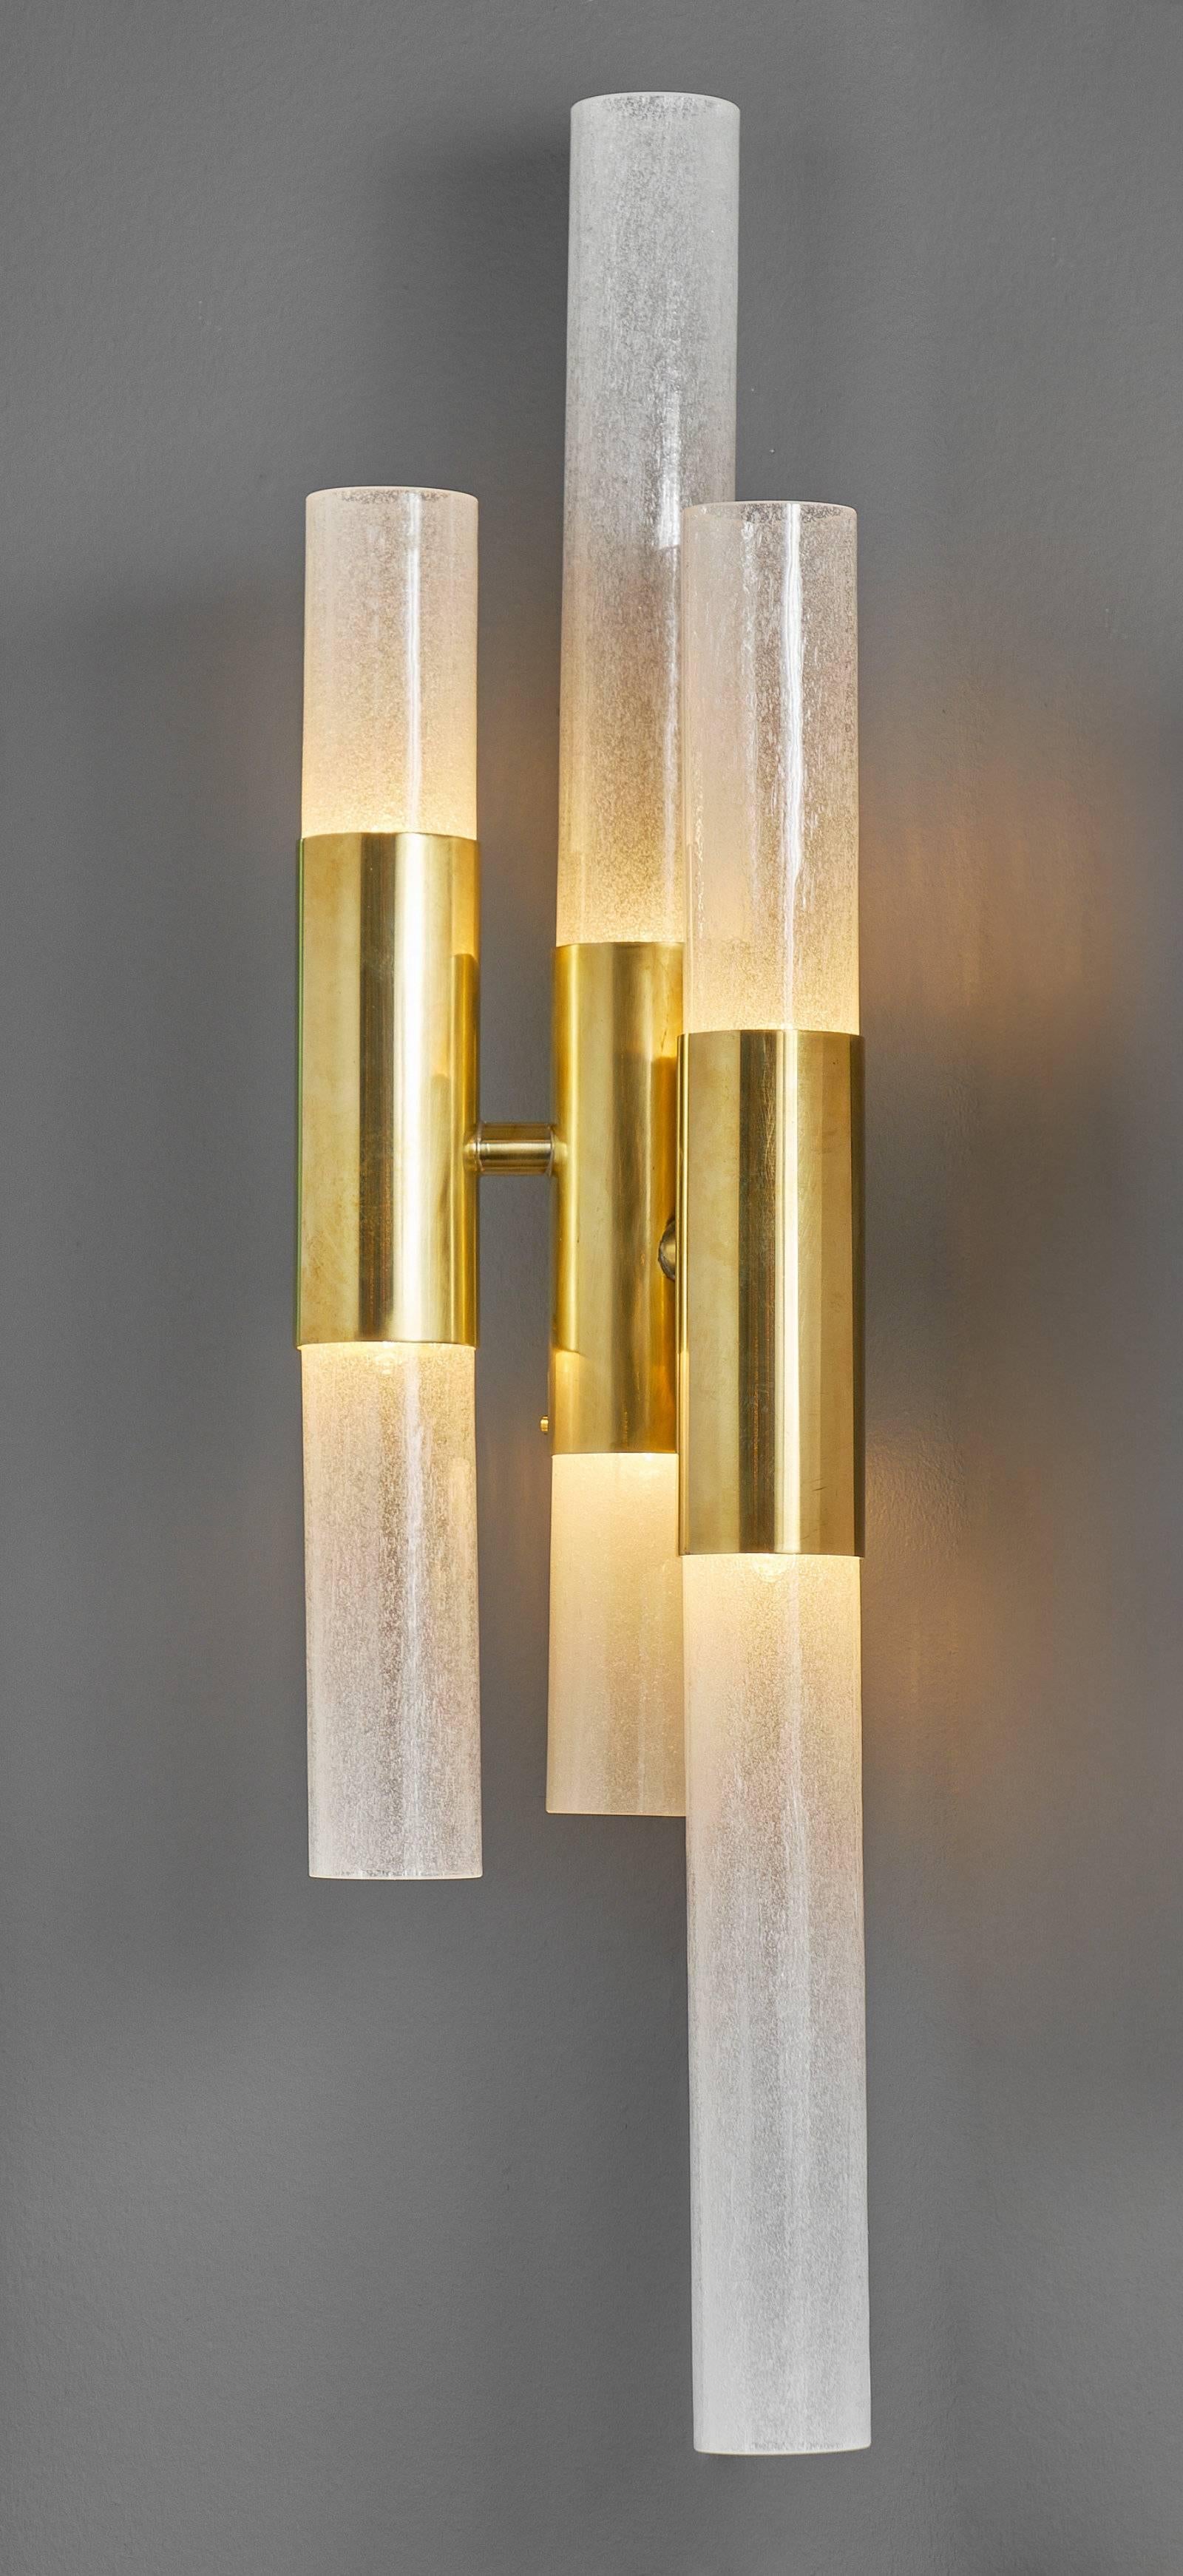 Pair of Murano glass tube sconces each featuring “pulegoso” tubes with a gilt brass tubular structure. This pair has been newly wired for US standards.